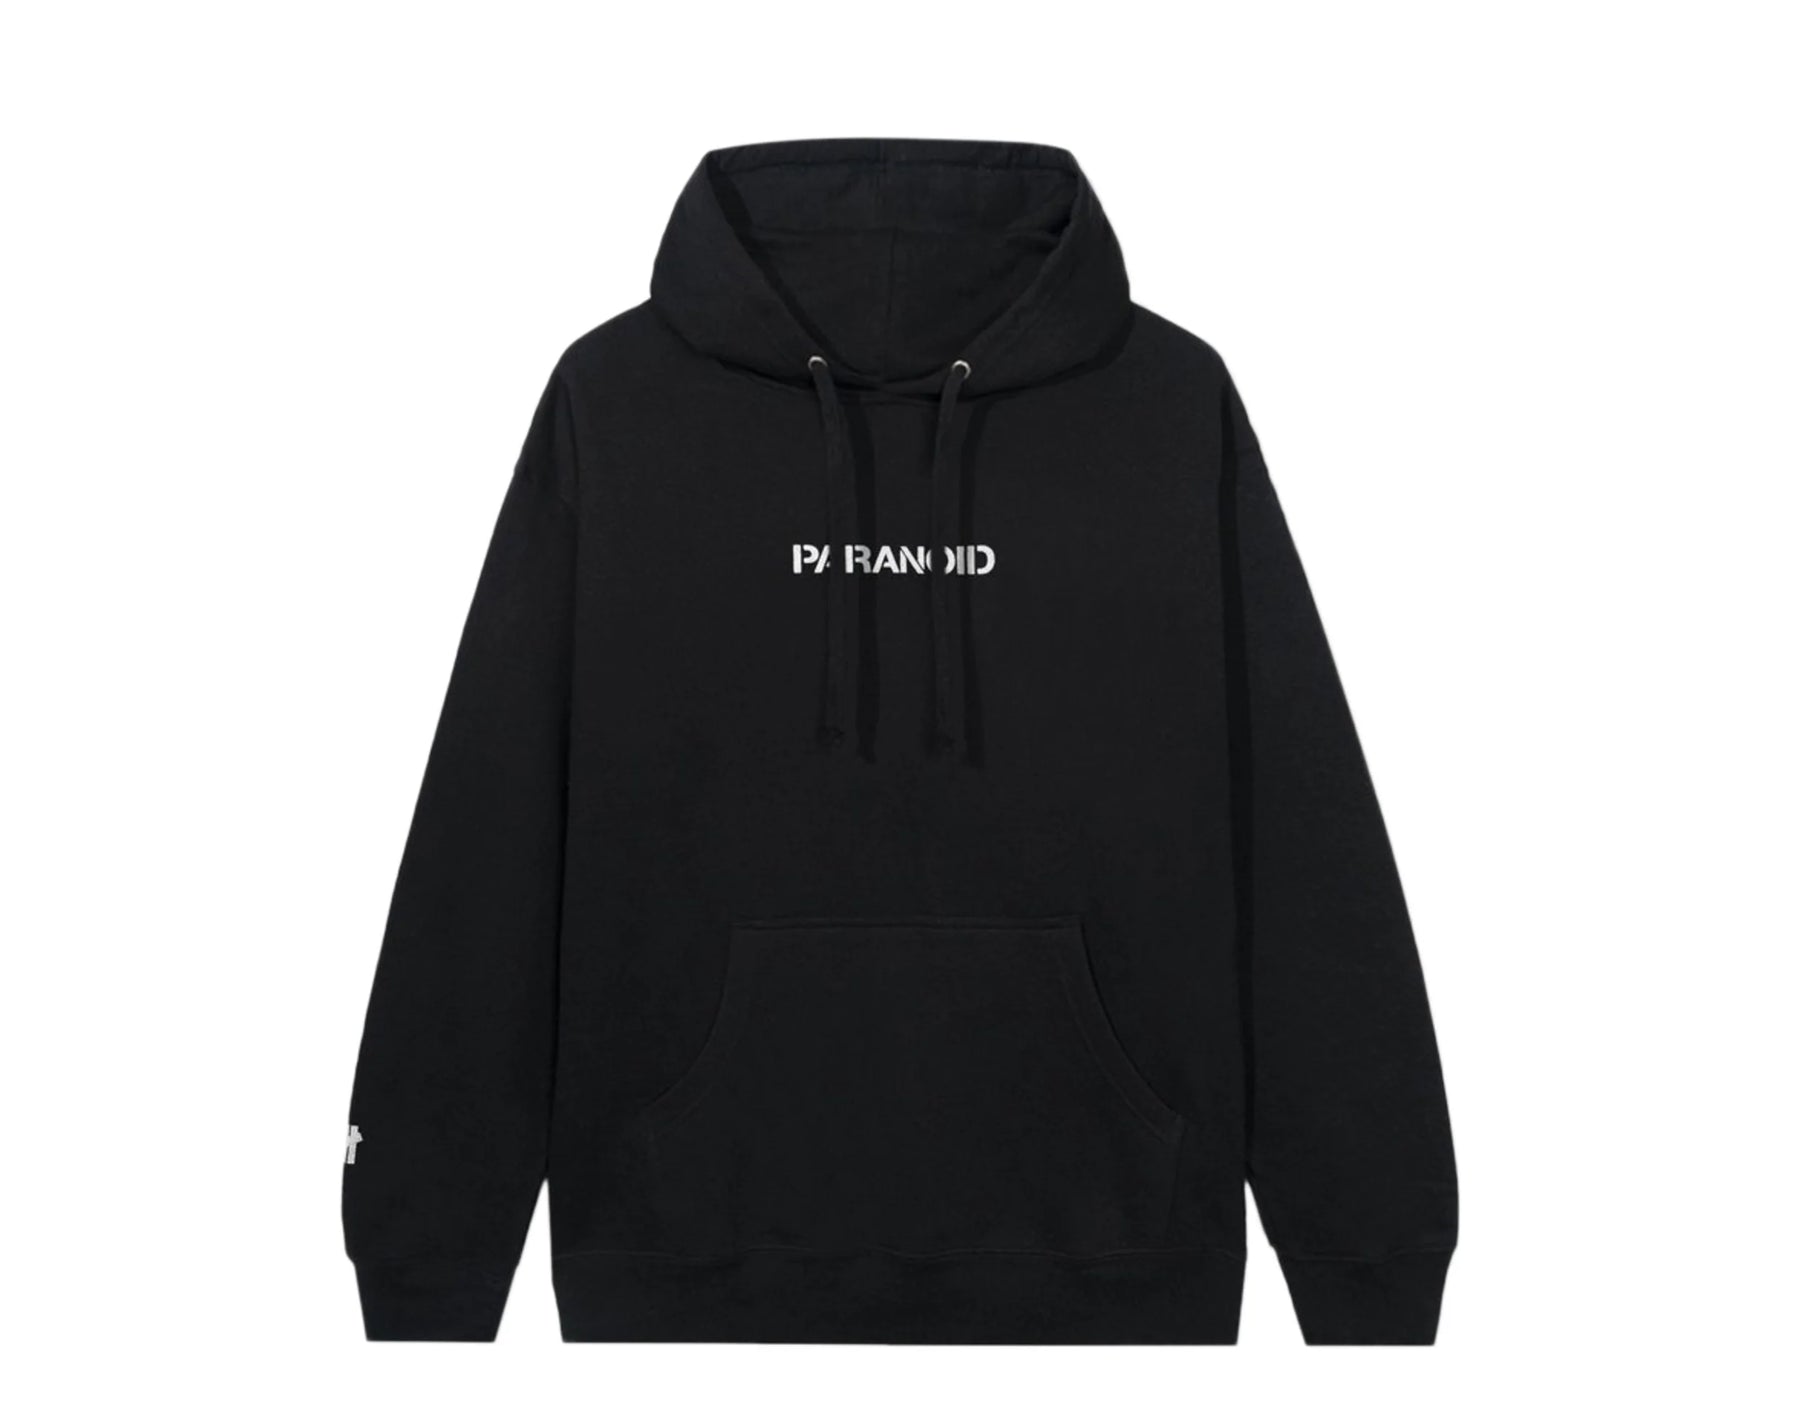 ASSC x Undefeated 'Paranoid' Hoodie Black